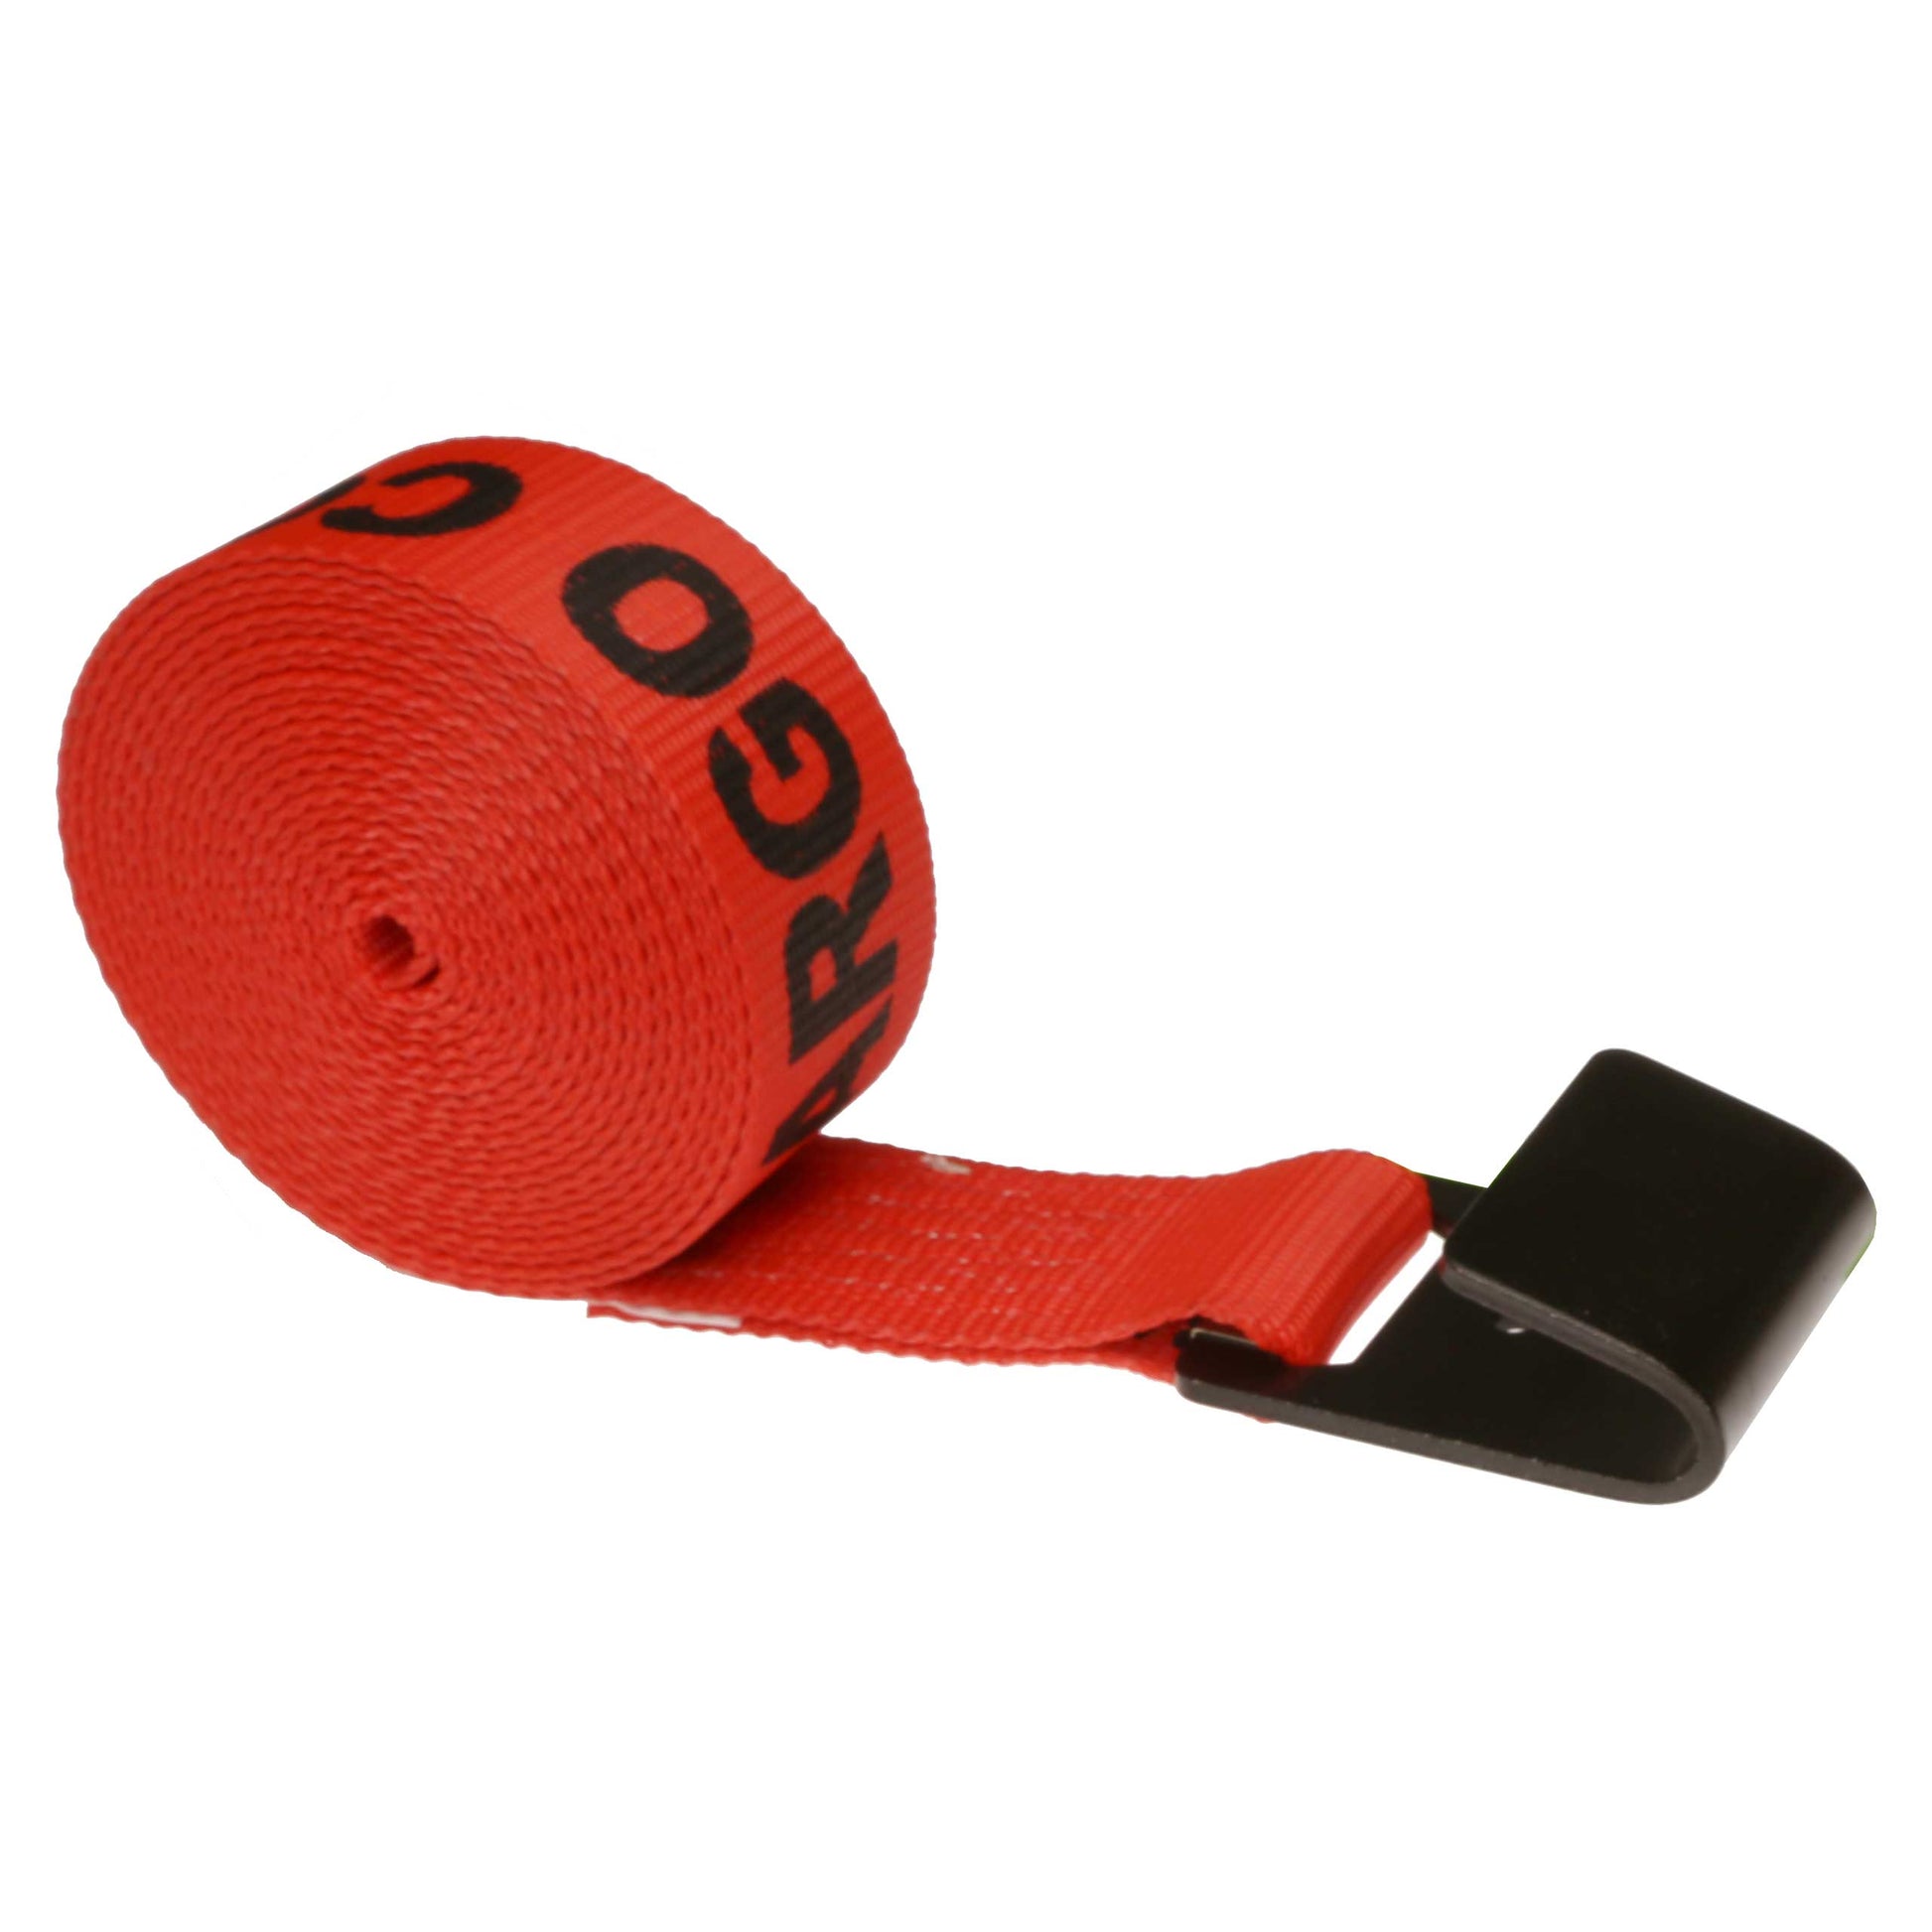 2 inch x 40 foot Red Winch Strap with Flat Hook